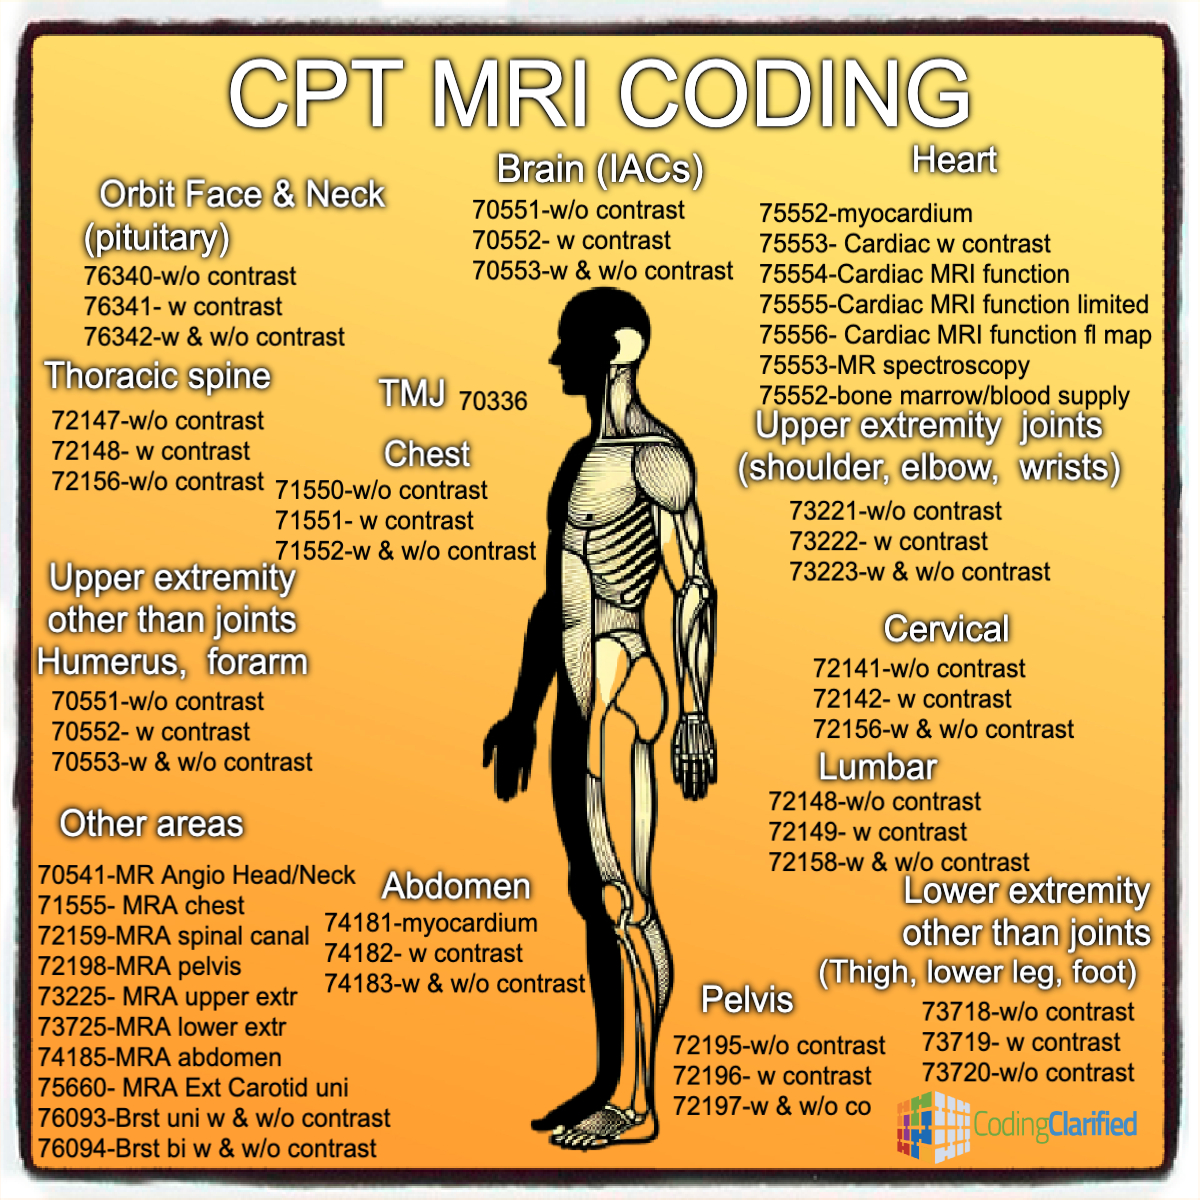 CPT MRI Medical Coding graphic with common CPT codes for MRI's